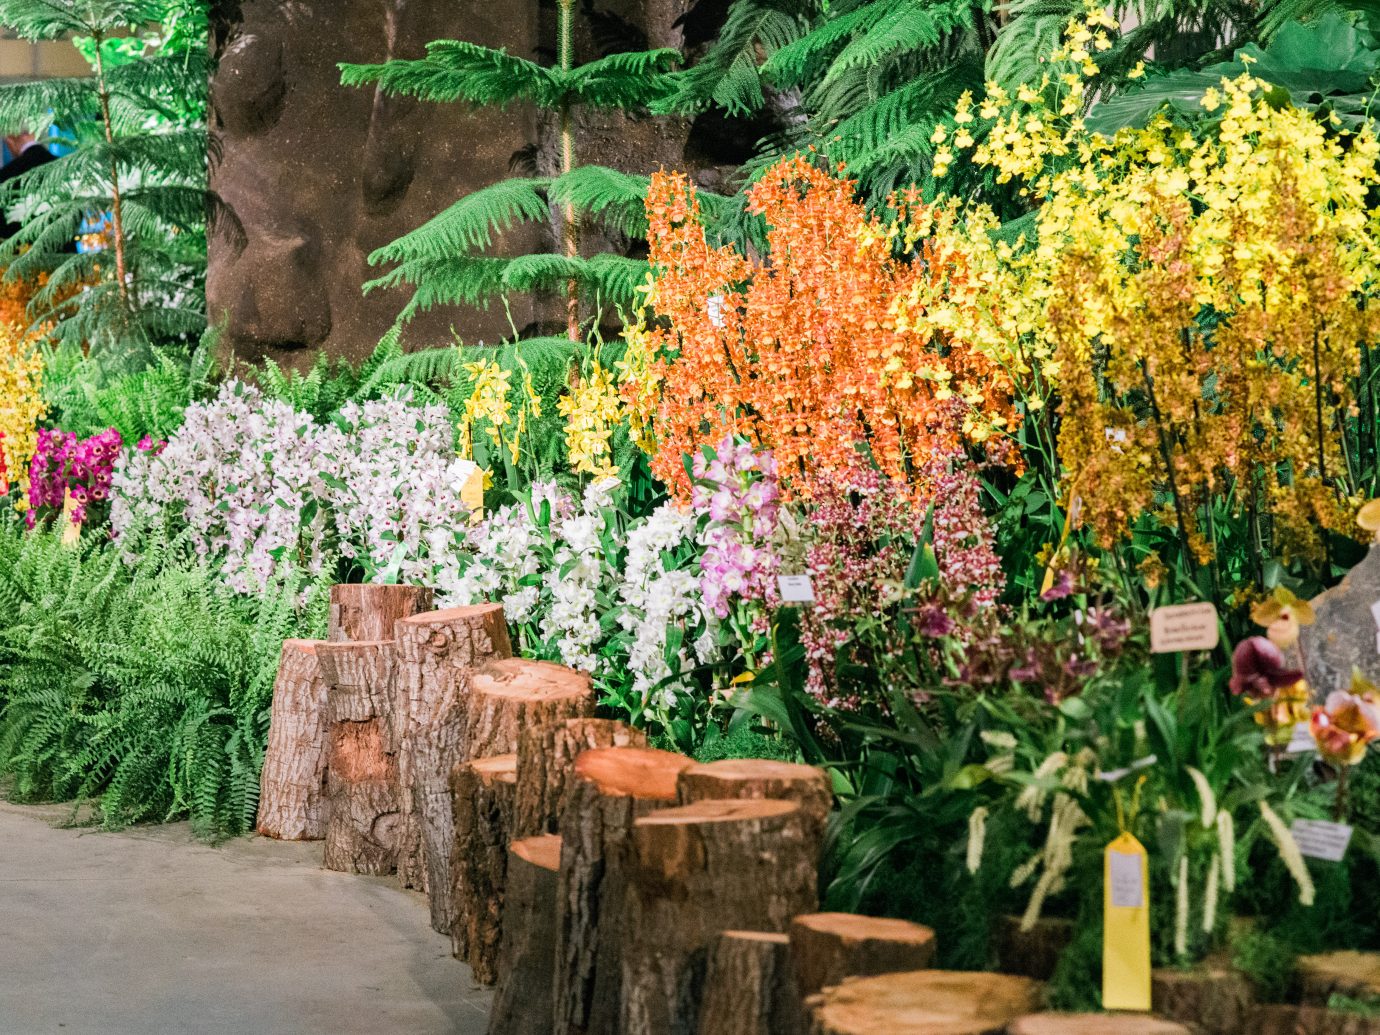 flower display at the International Orchid Show in Santa Barbara